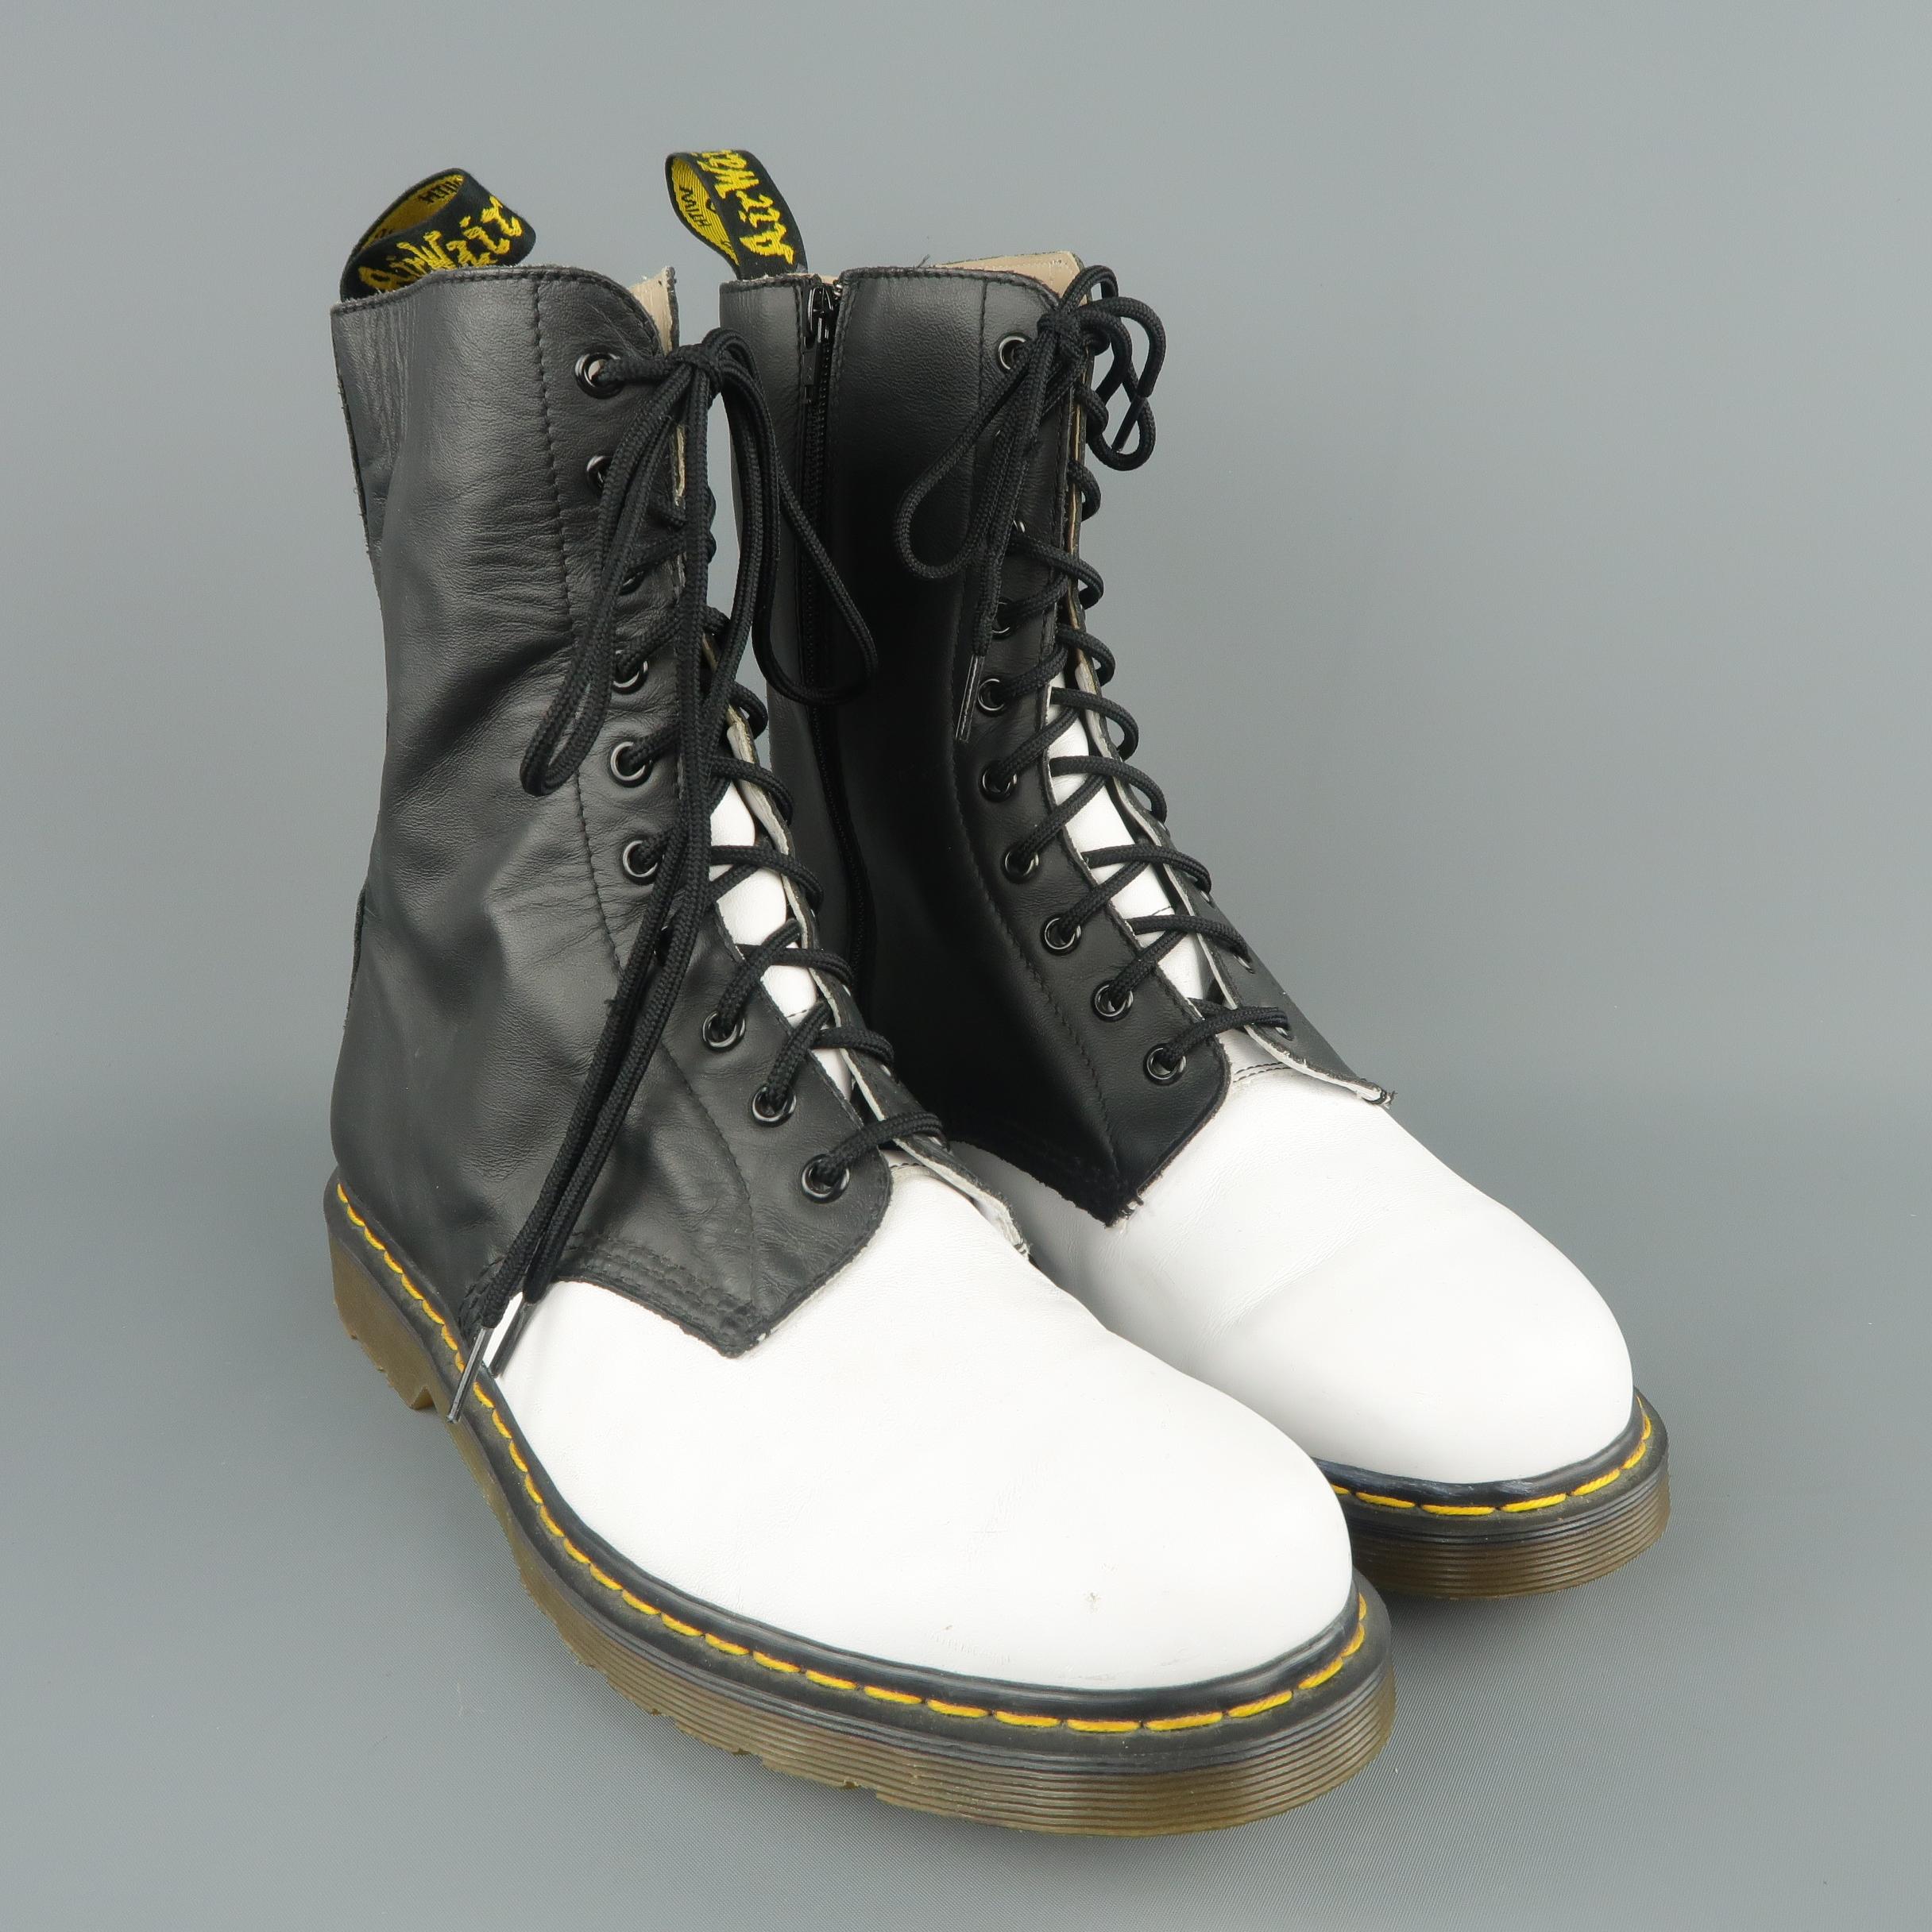 Limited Edition Yohji Yamamoto For Dr. Martens combat boots feature a white leather toe with black leather shaft, lace up front, and side zip. Wear throughout. As is.
 
Fair Pre-Owned Condition.
Marked: US 11
 
Measurements:
 
Outsole: 12.5  x 4.5